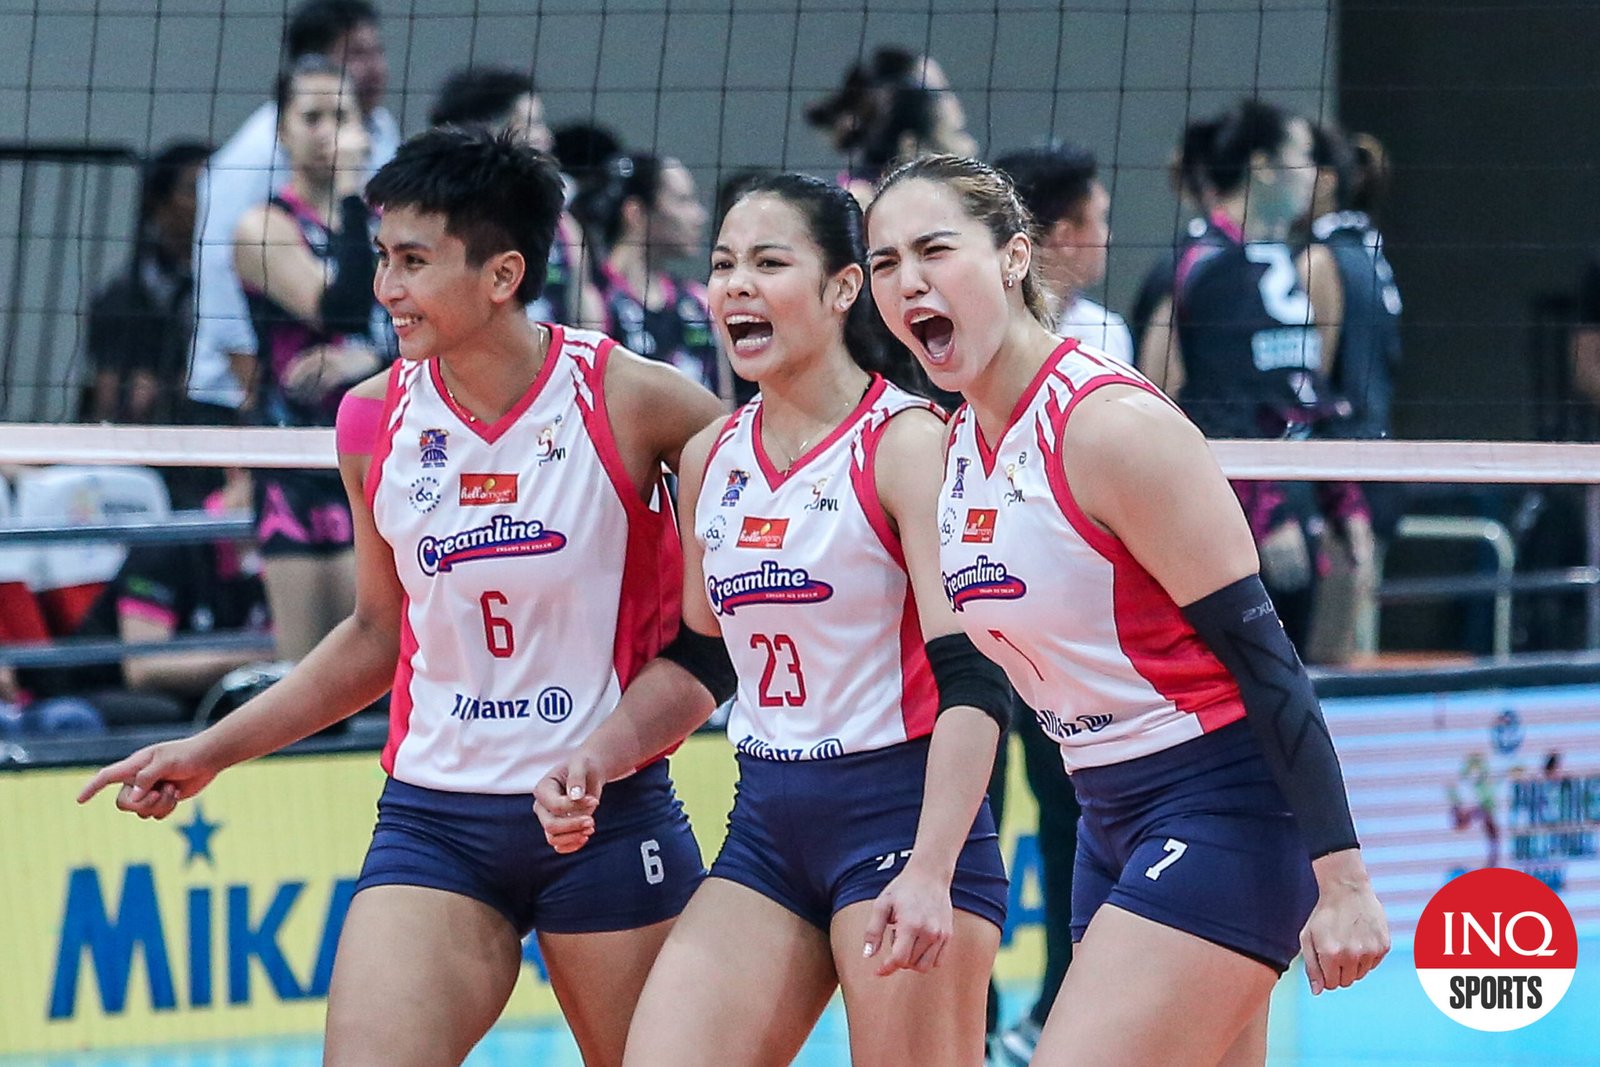 Success doesn’t distract Creamline from philosophy